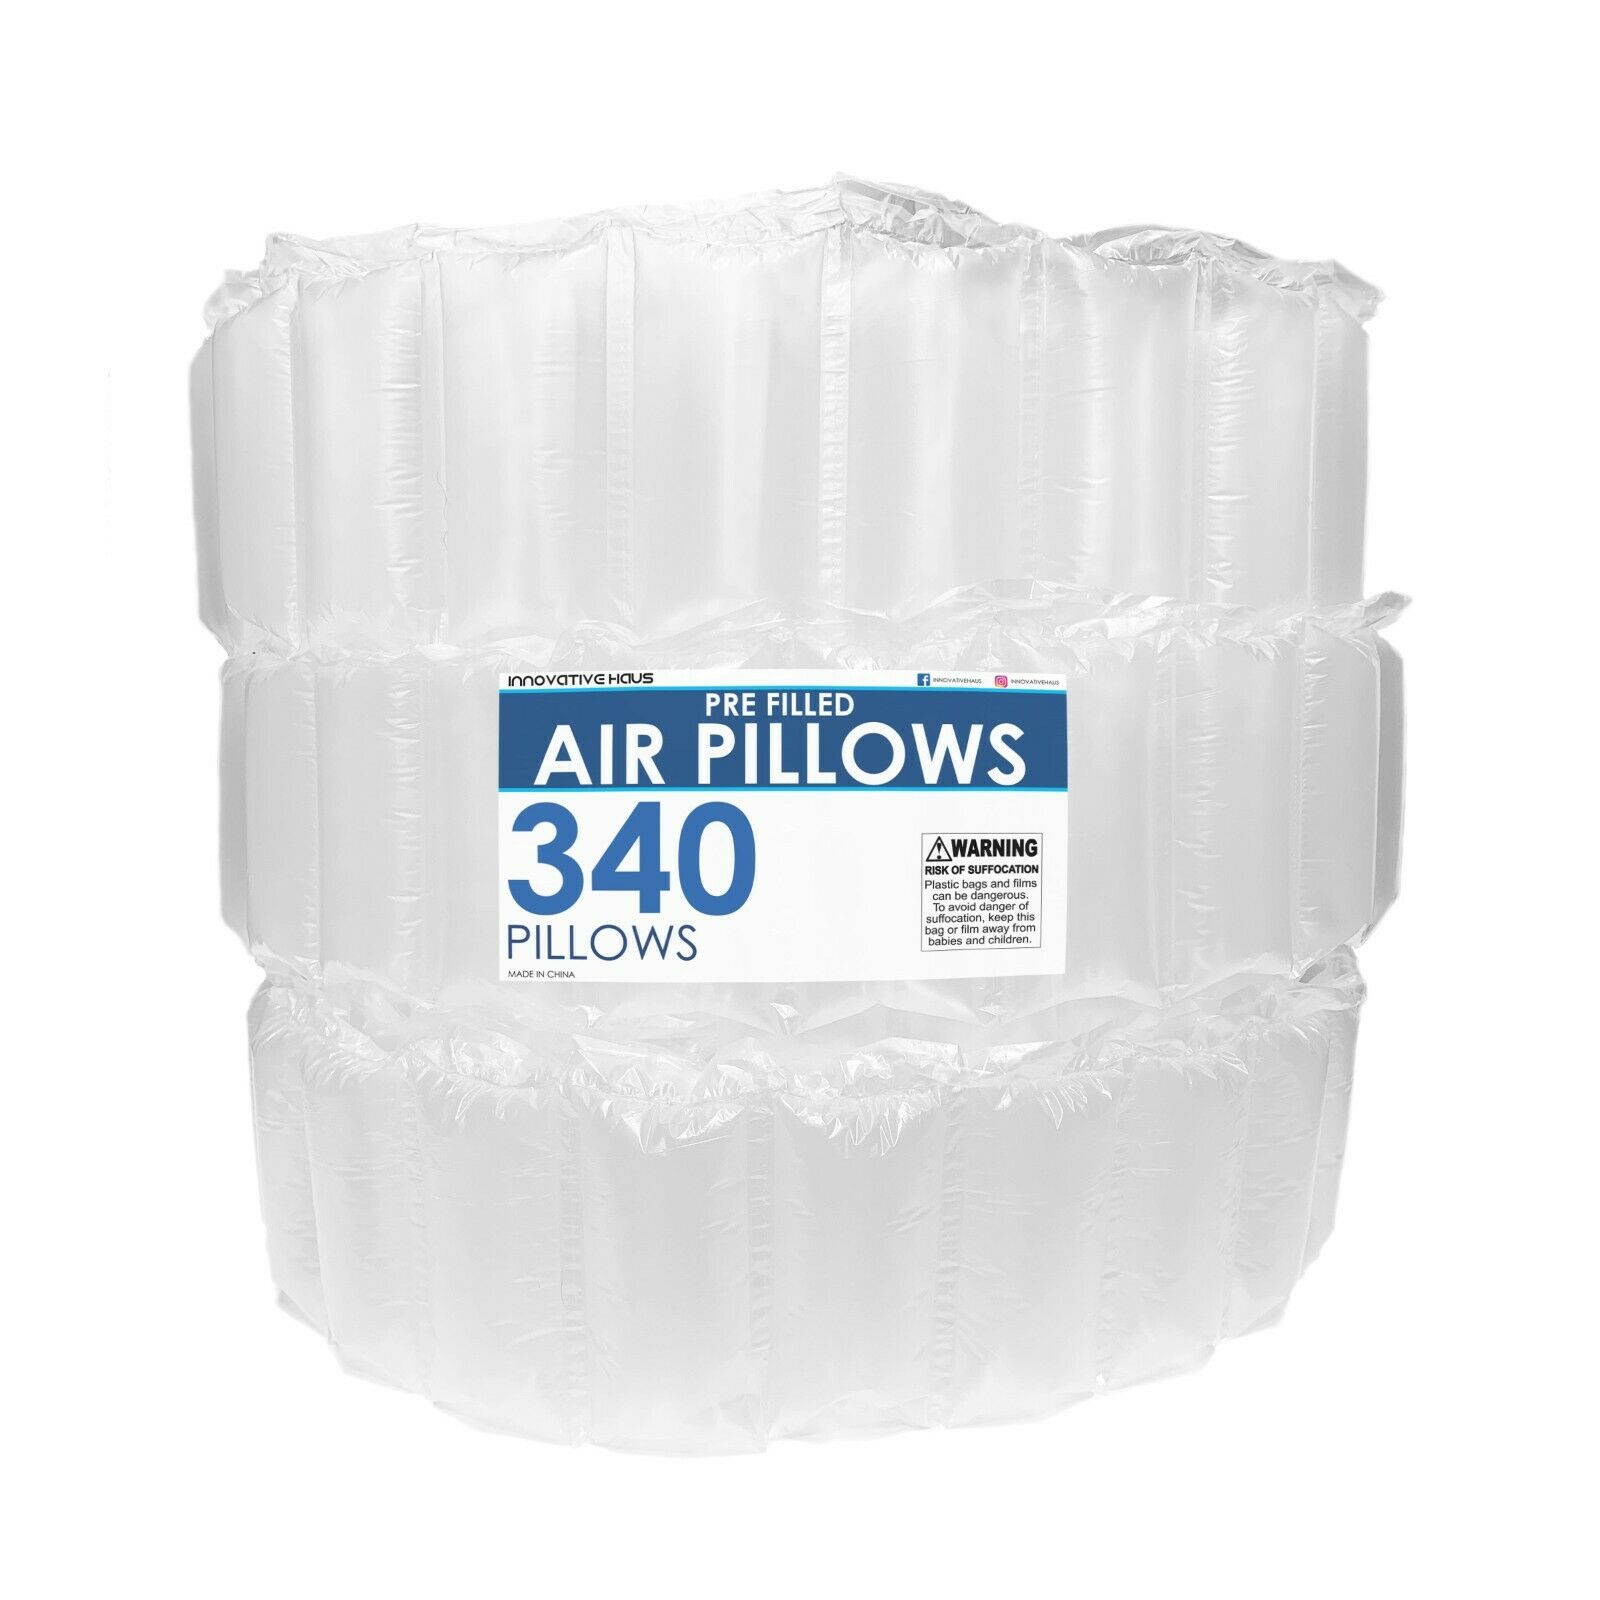 4x8 Air Pillows 340 Count Void Fill Package Dunnage Shipping Cushioning Packing